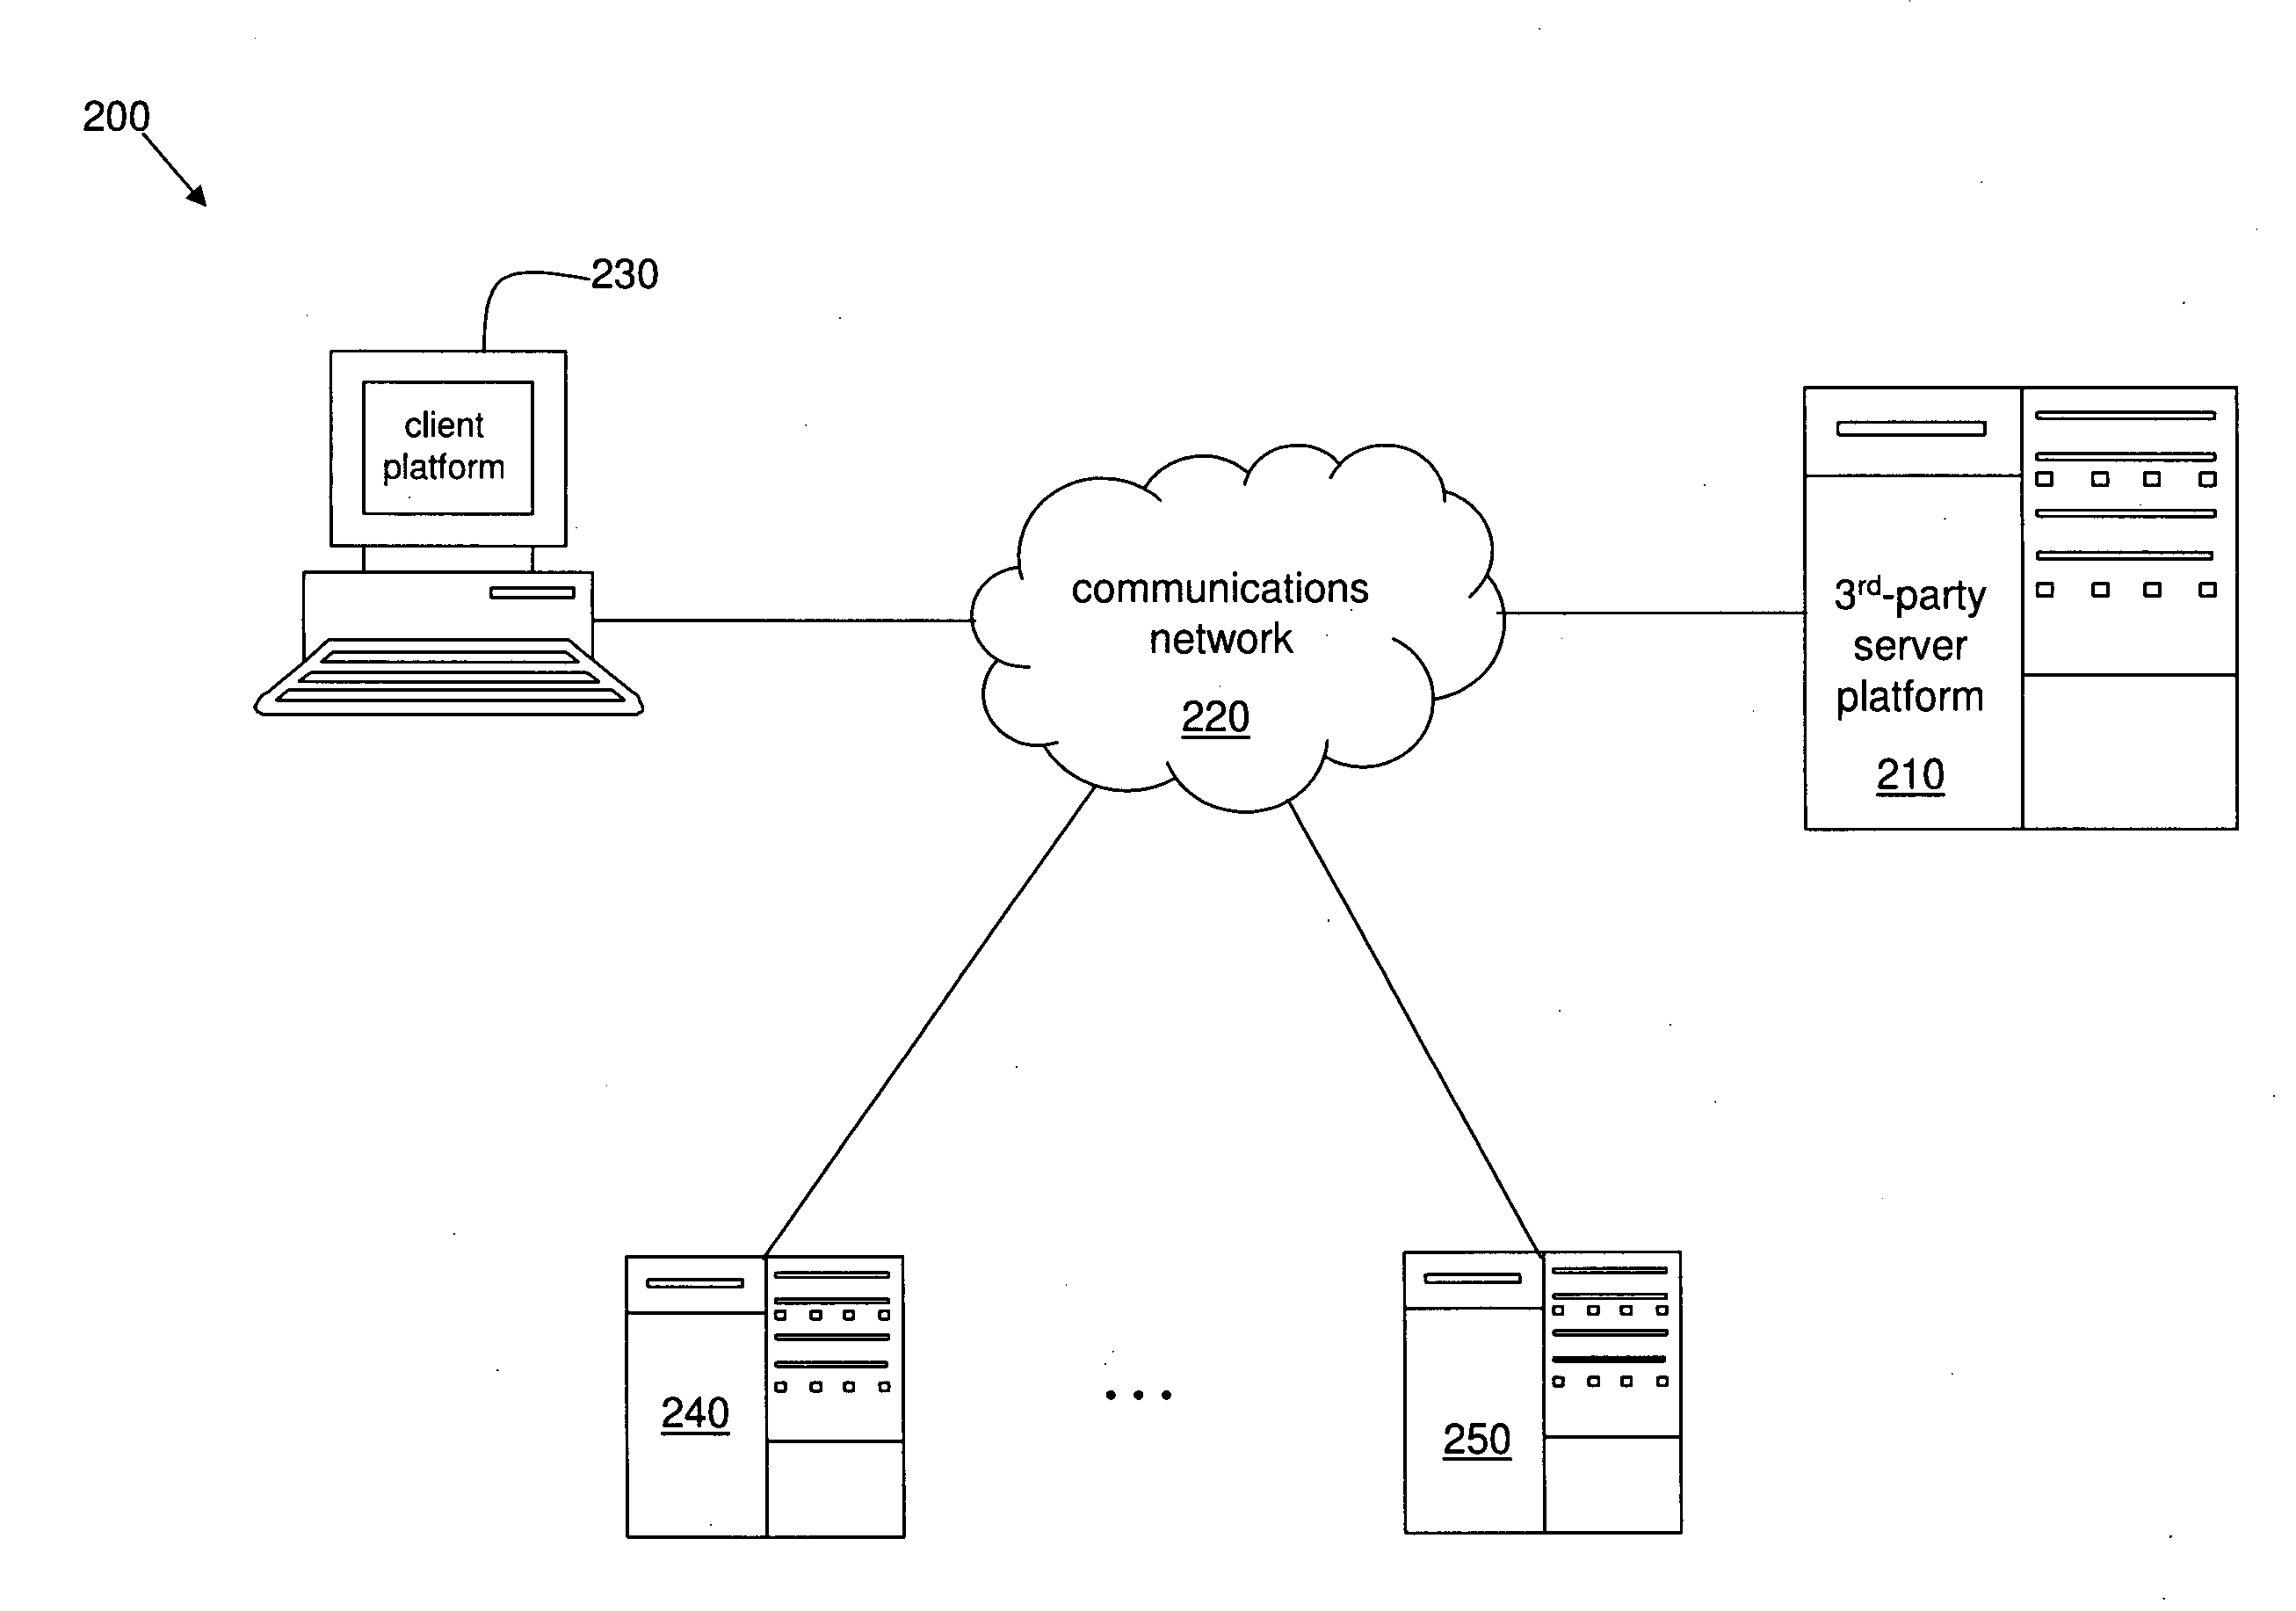 System and method for anonymously servicing lottery players